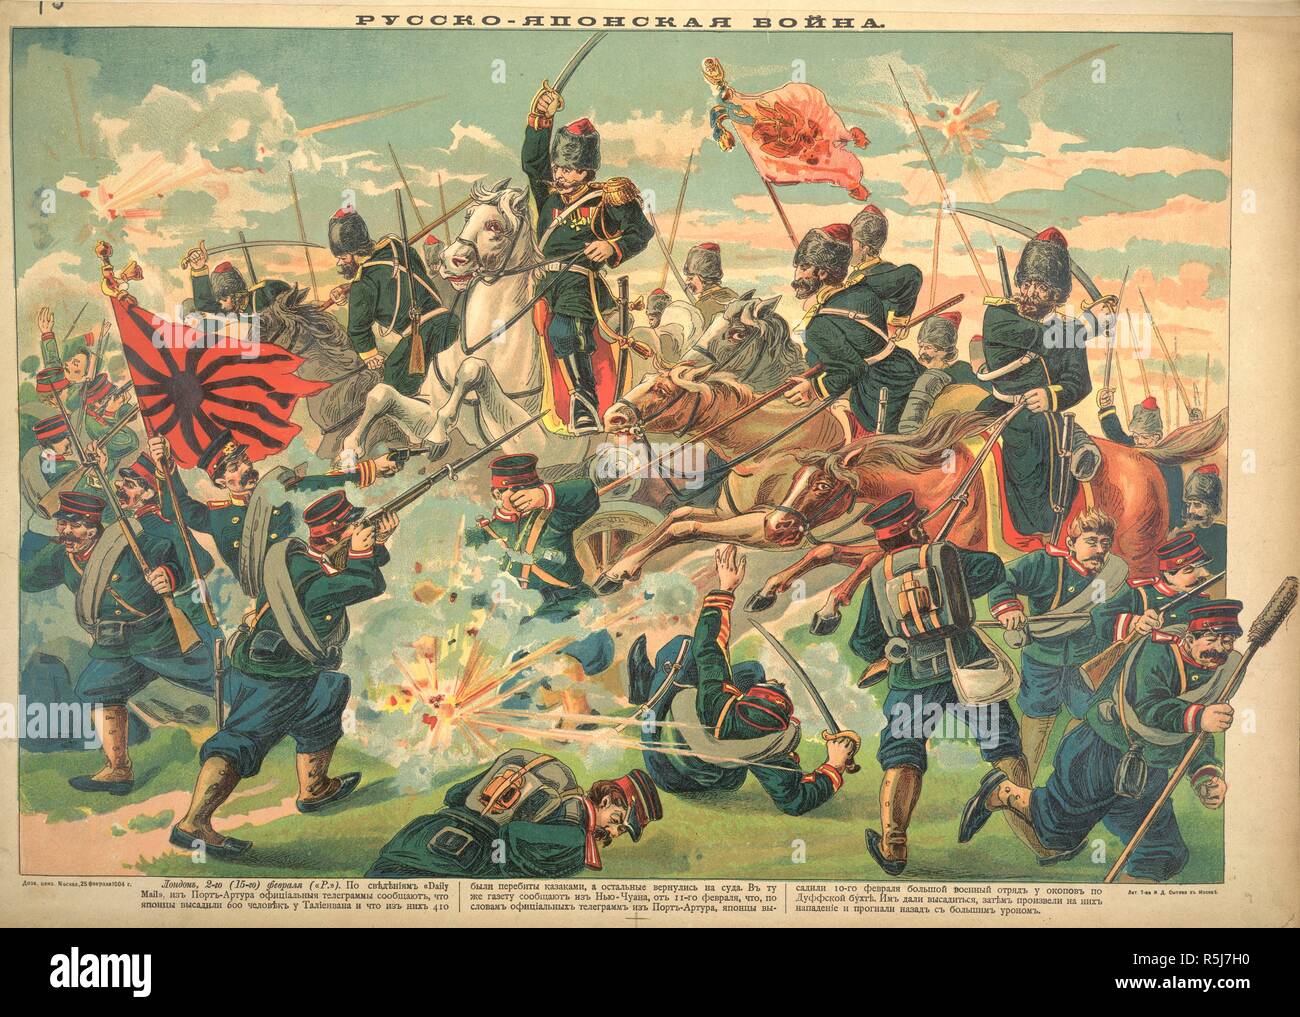 Japanese casualties. A set of eight coloured cartoons of the Russo-Japa. Moscow, 1904. Report on Japanese casualties'. Russian cossack cavalry fighting Japanese infantry. The Russo-Japanese war.  Image taken from A set of eight coloured cartoons of the Russo-Japanese war, etc.  Originally published/produced in Moscow, 1904. . Source: N.Tab.2005.(13), 5th. Language: Russian. Stock Photo